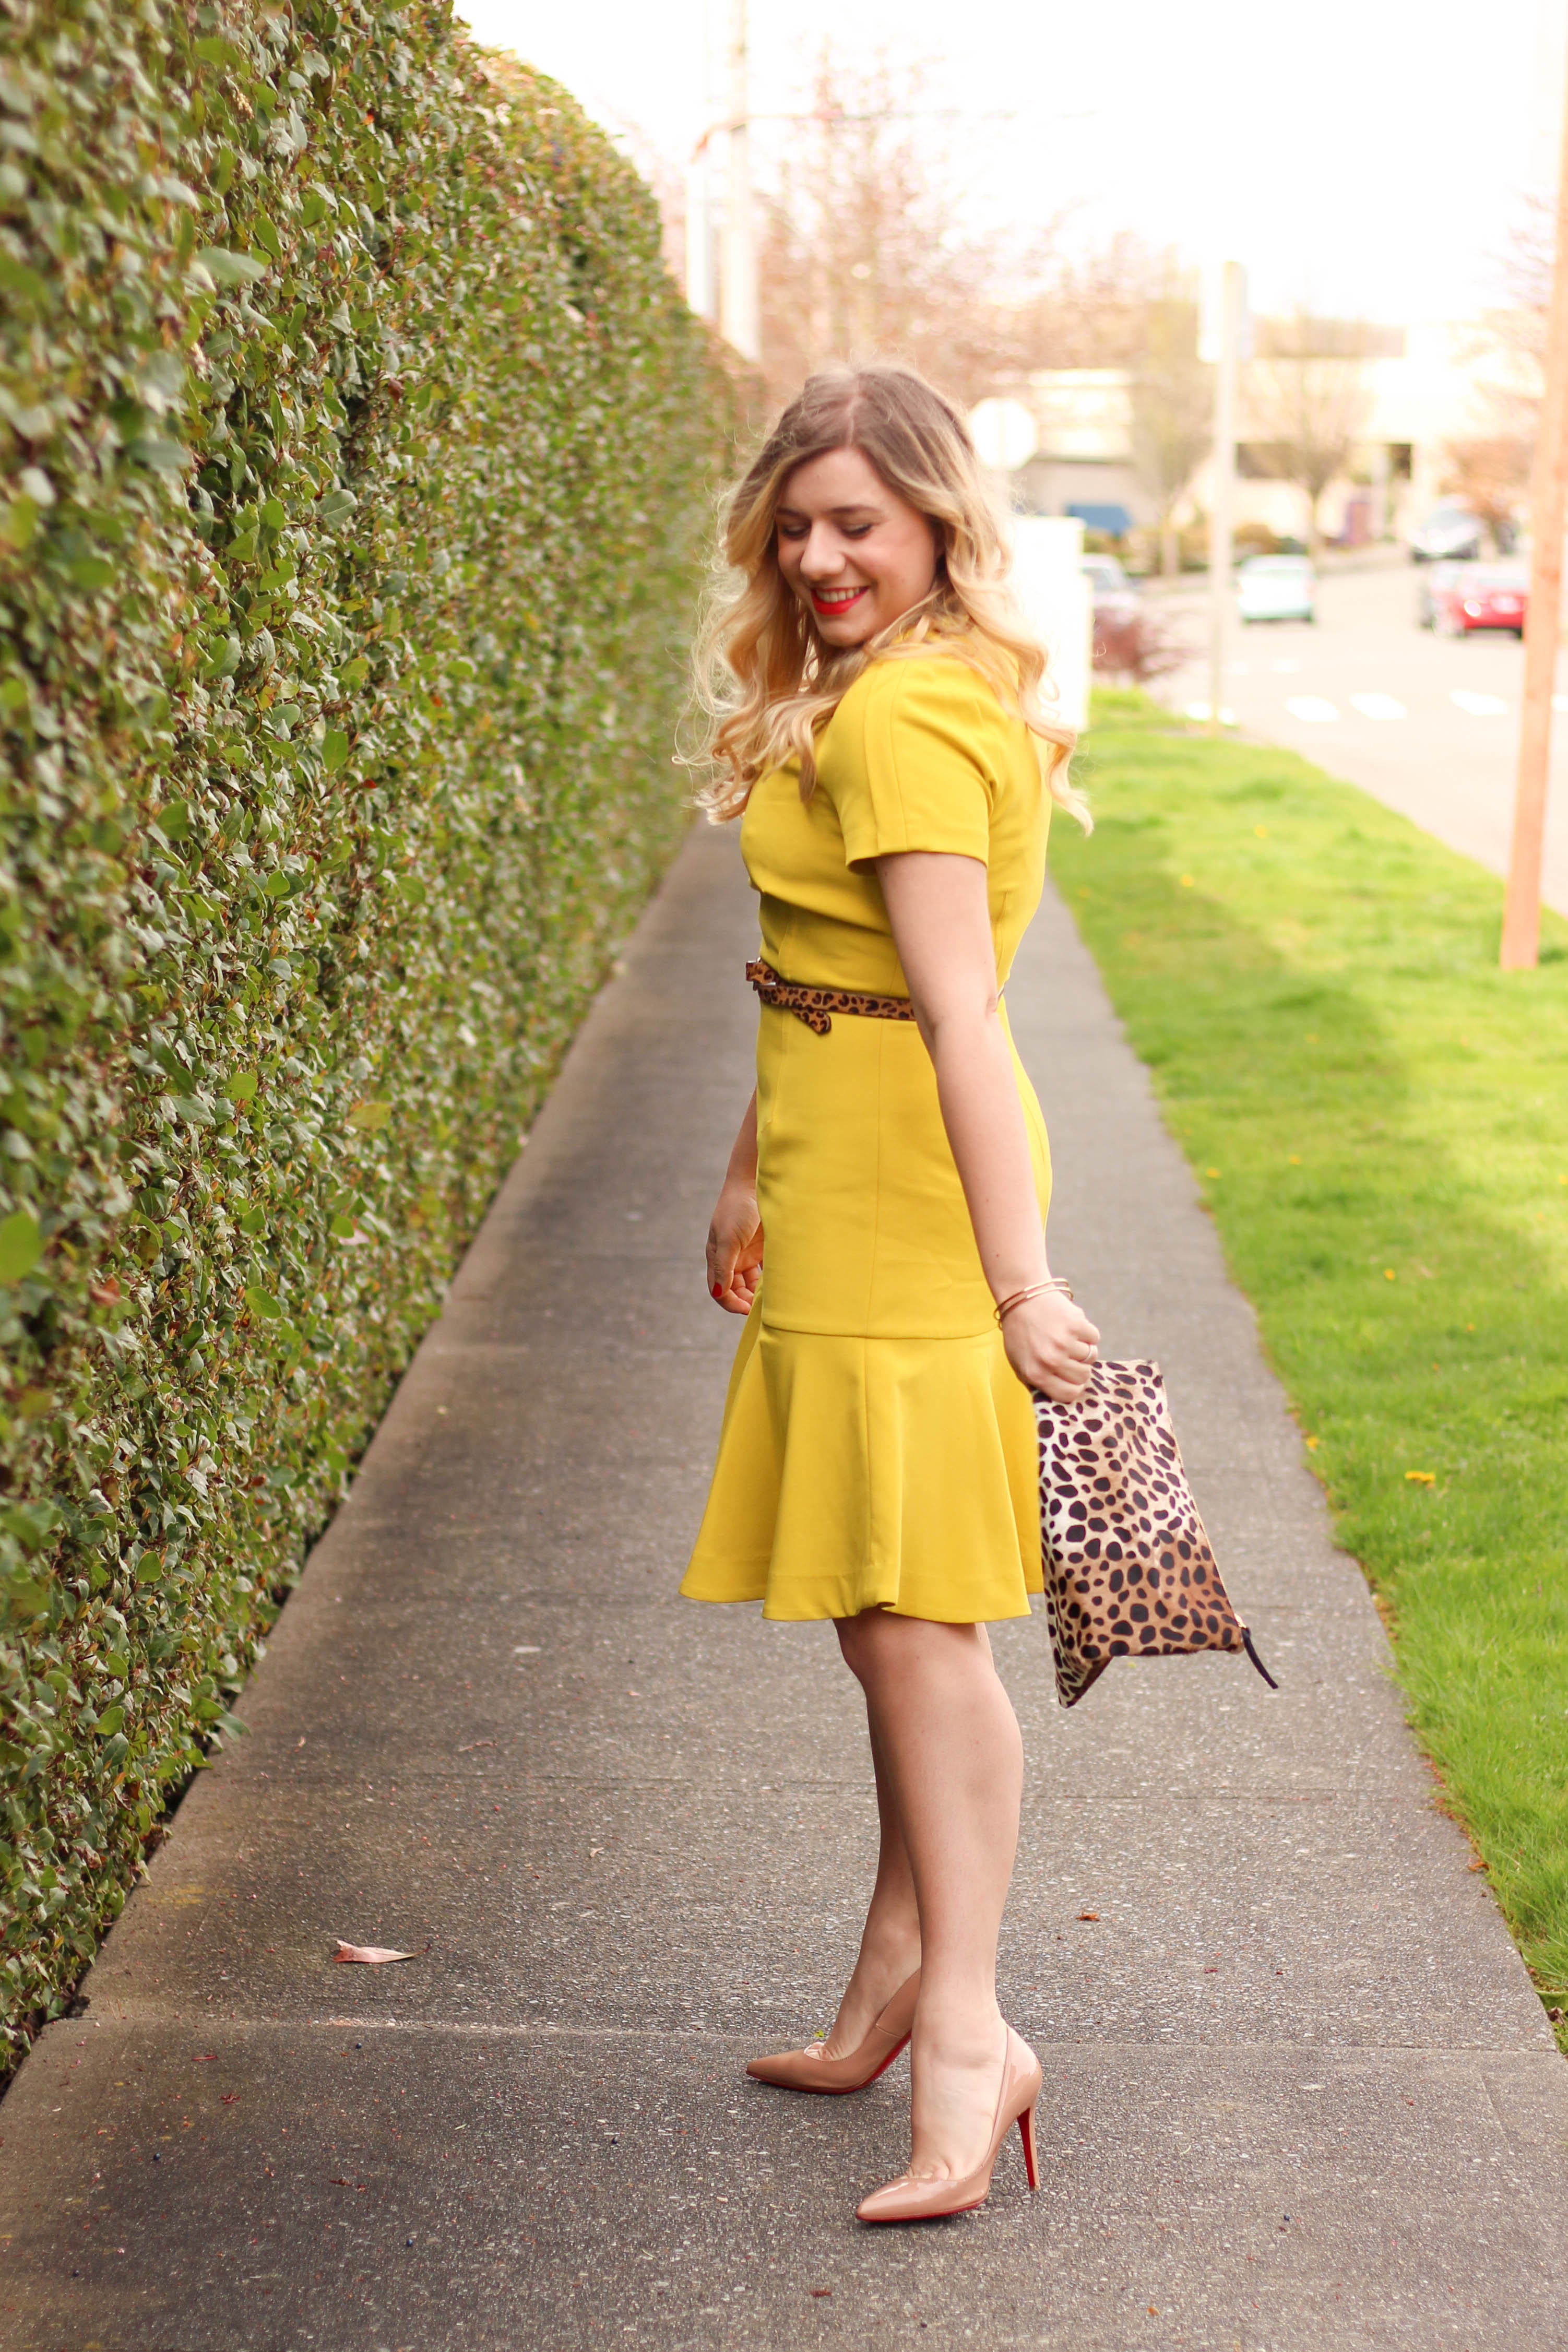 how to get 10k instagram followers - banana republic dress - clare v clutch - Easter outfit idea